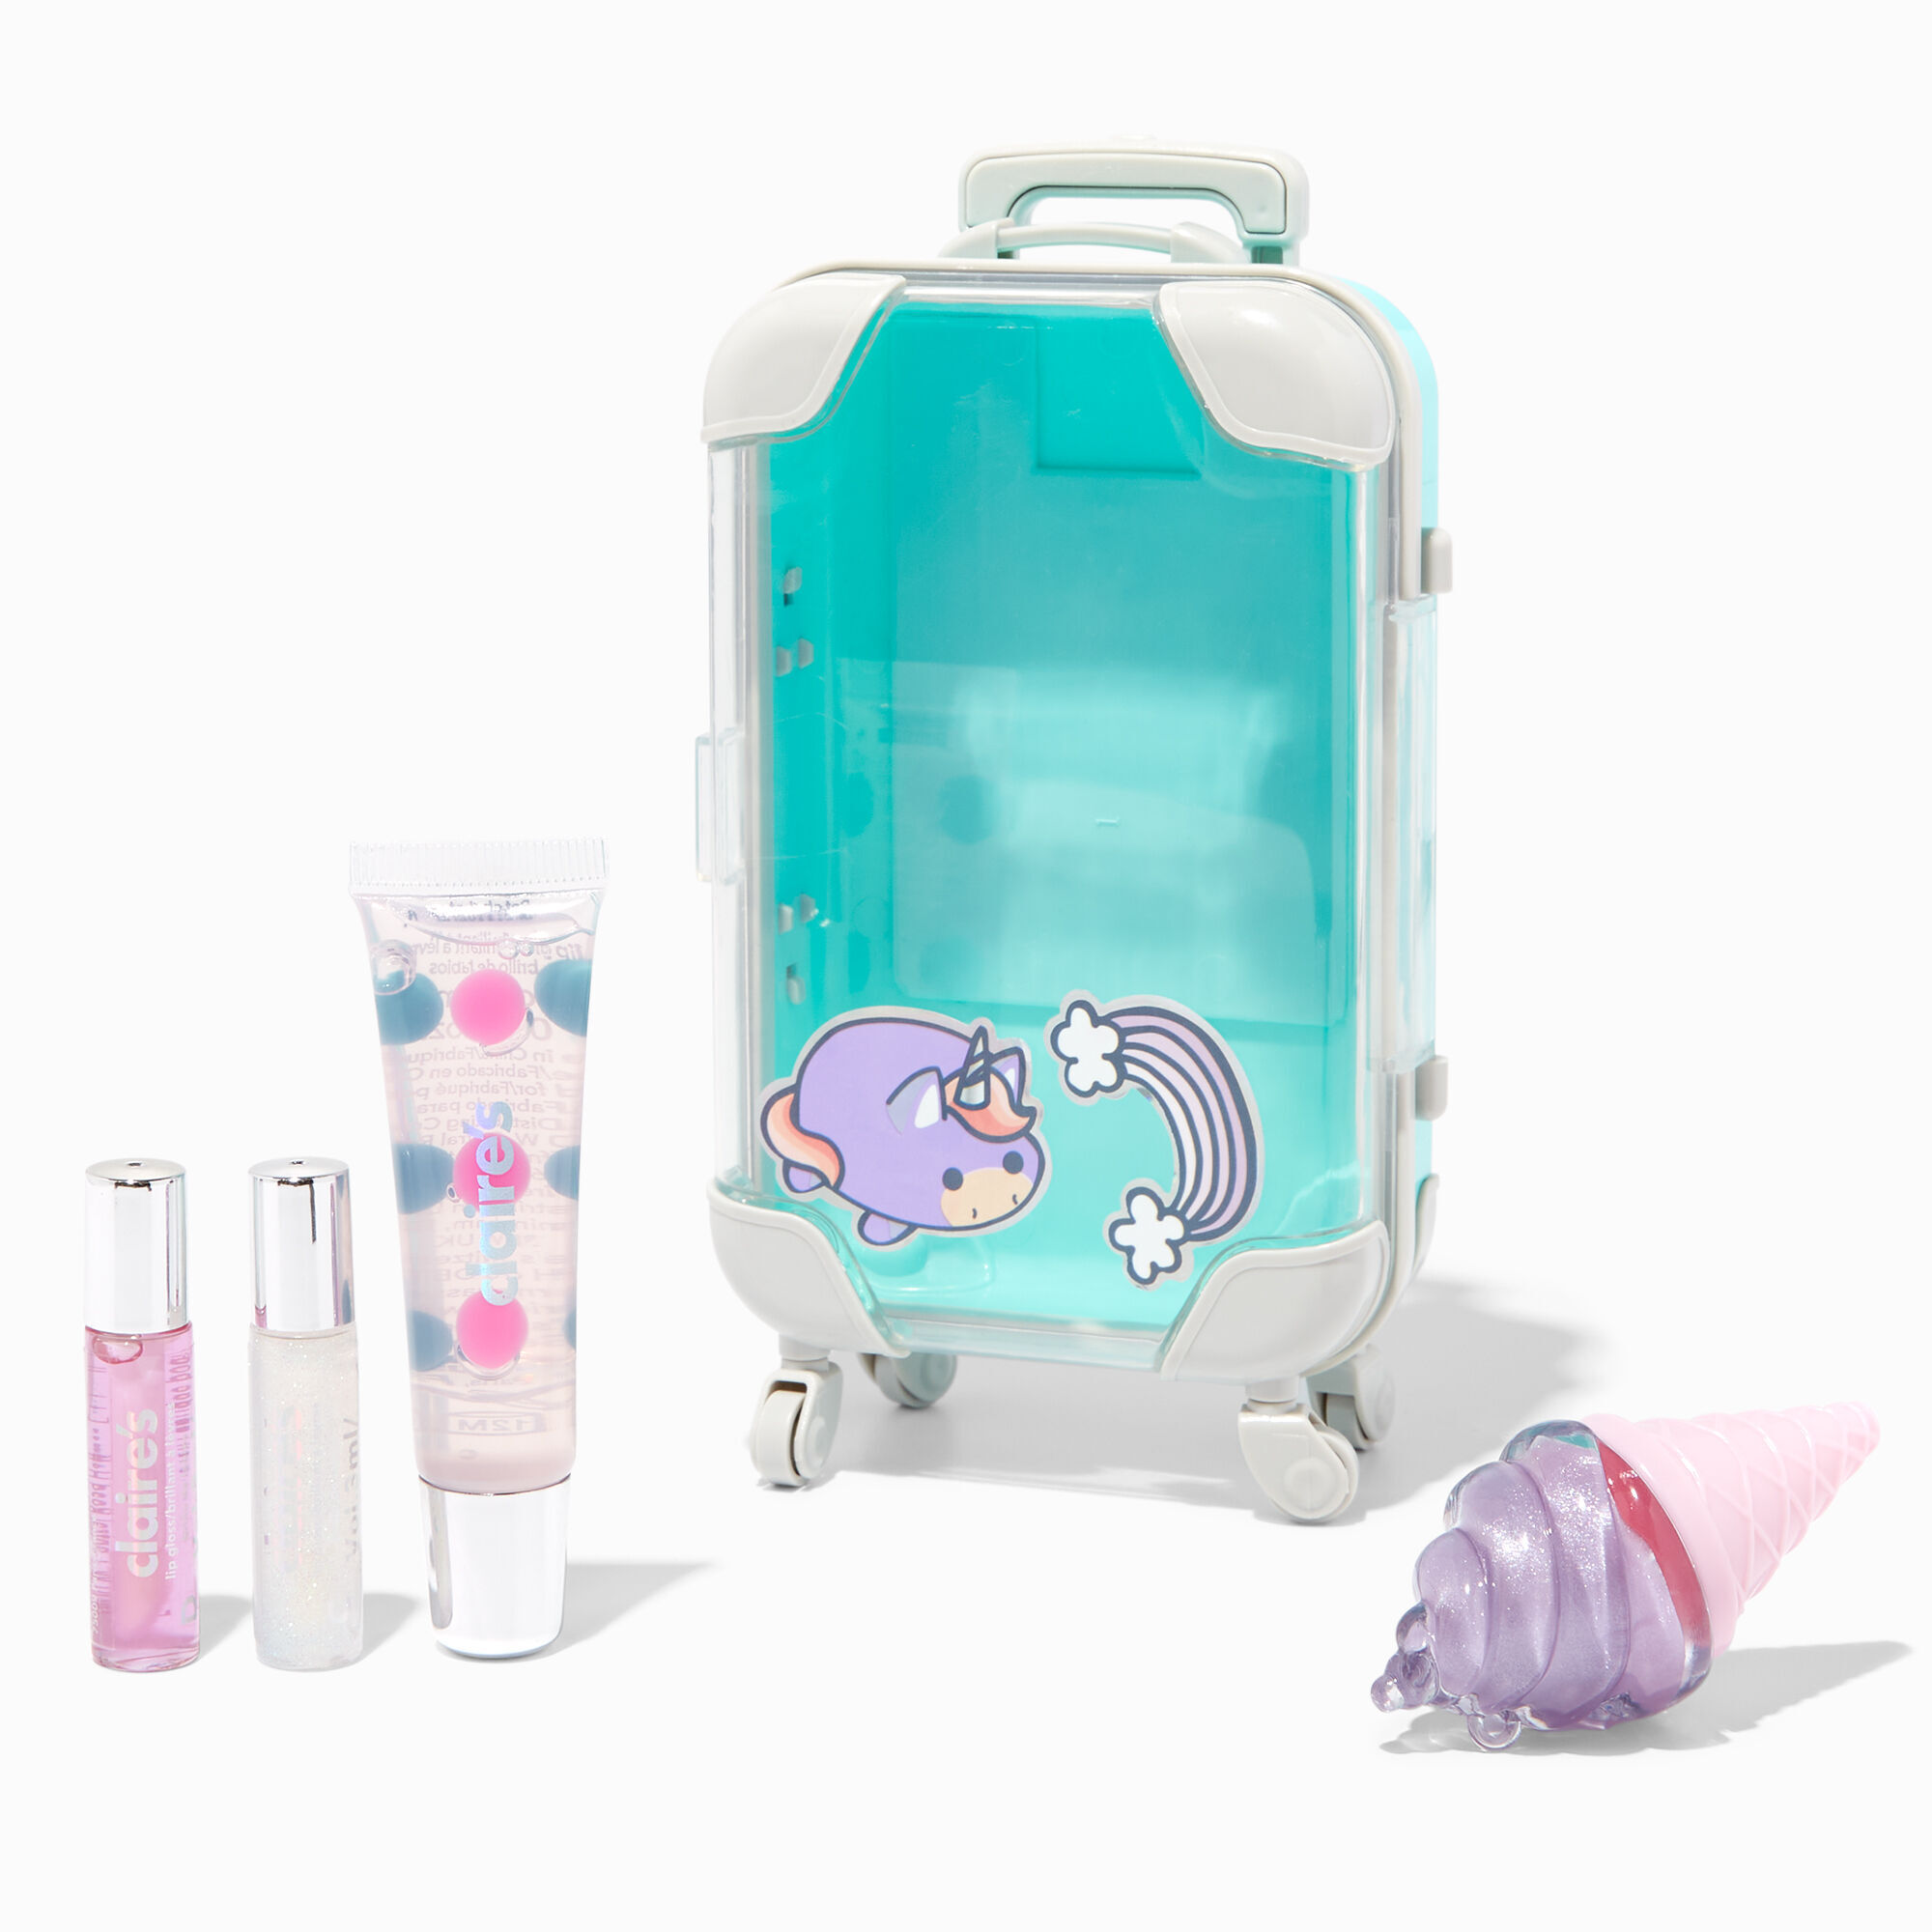 View Claires Chubby Unicorn Luggage Lip Gloss Set information